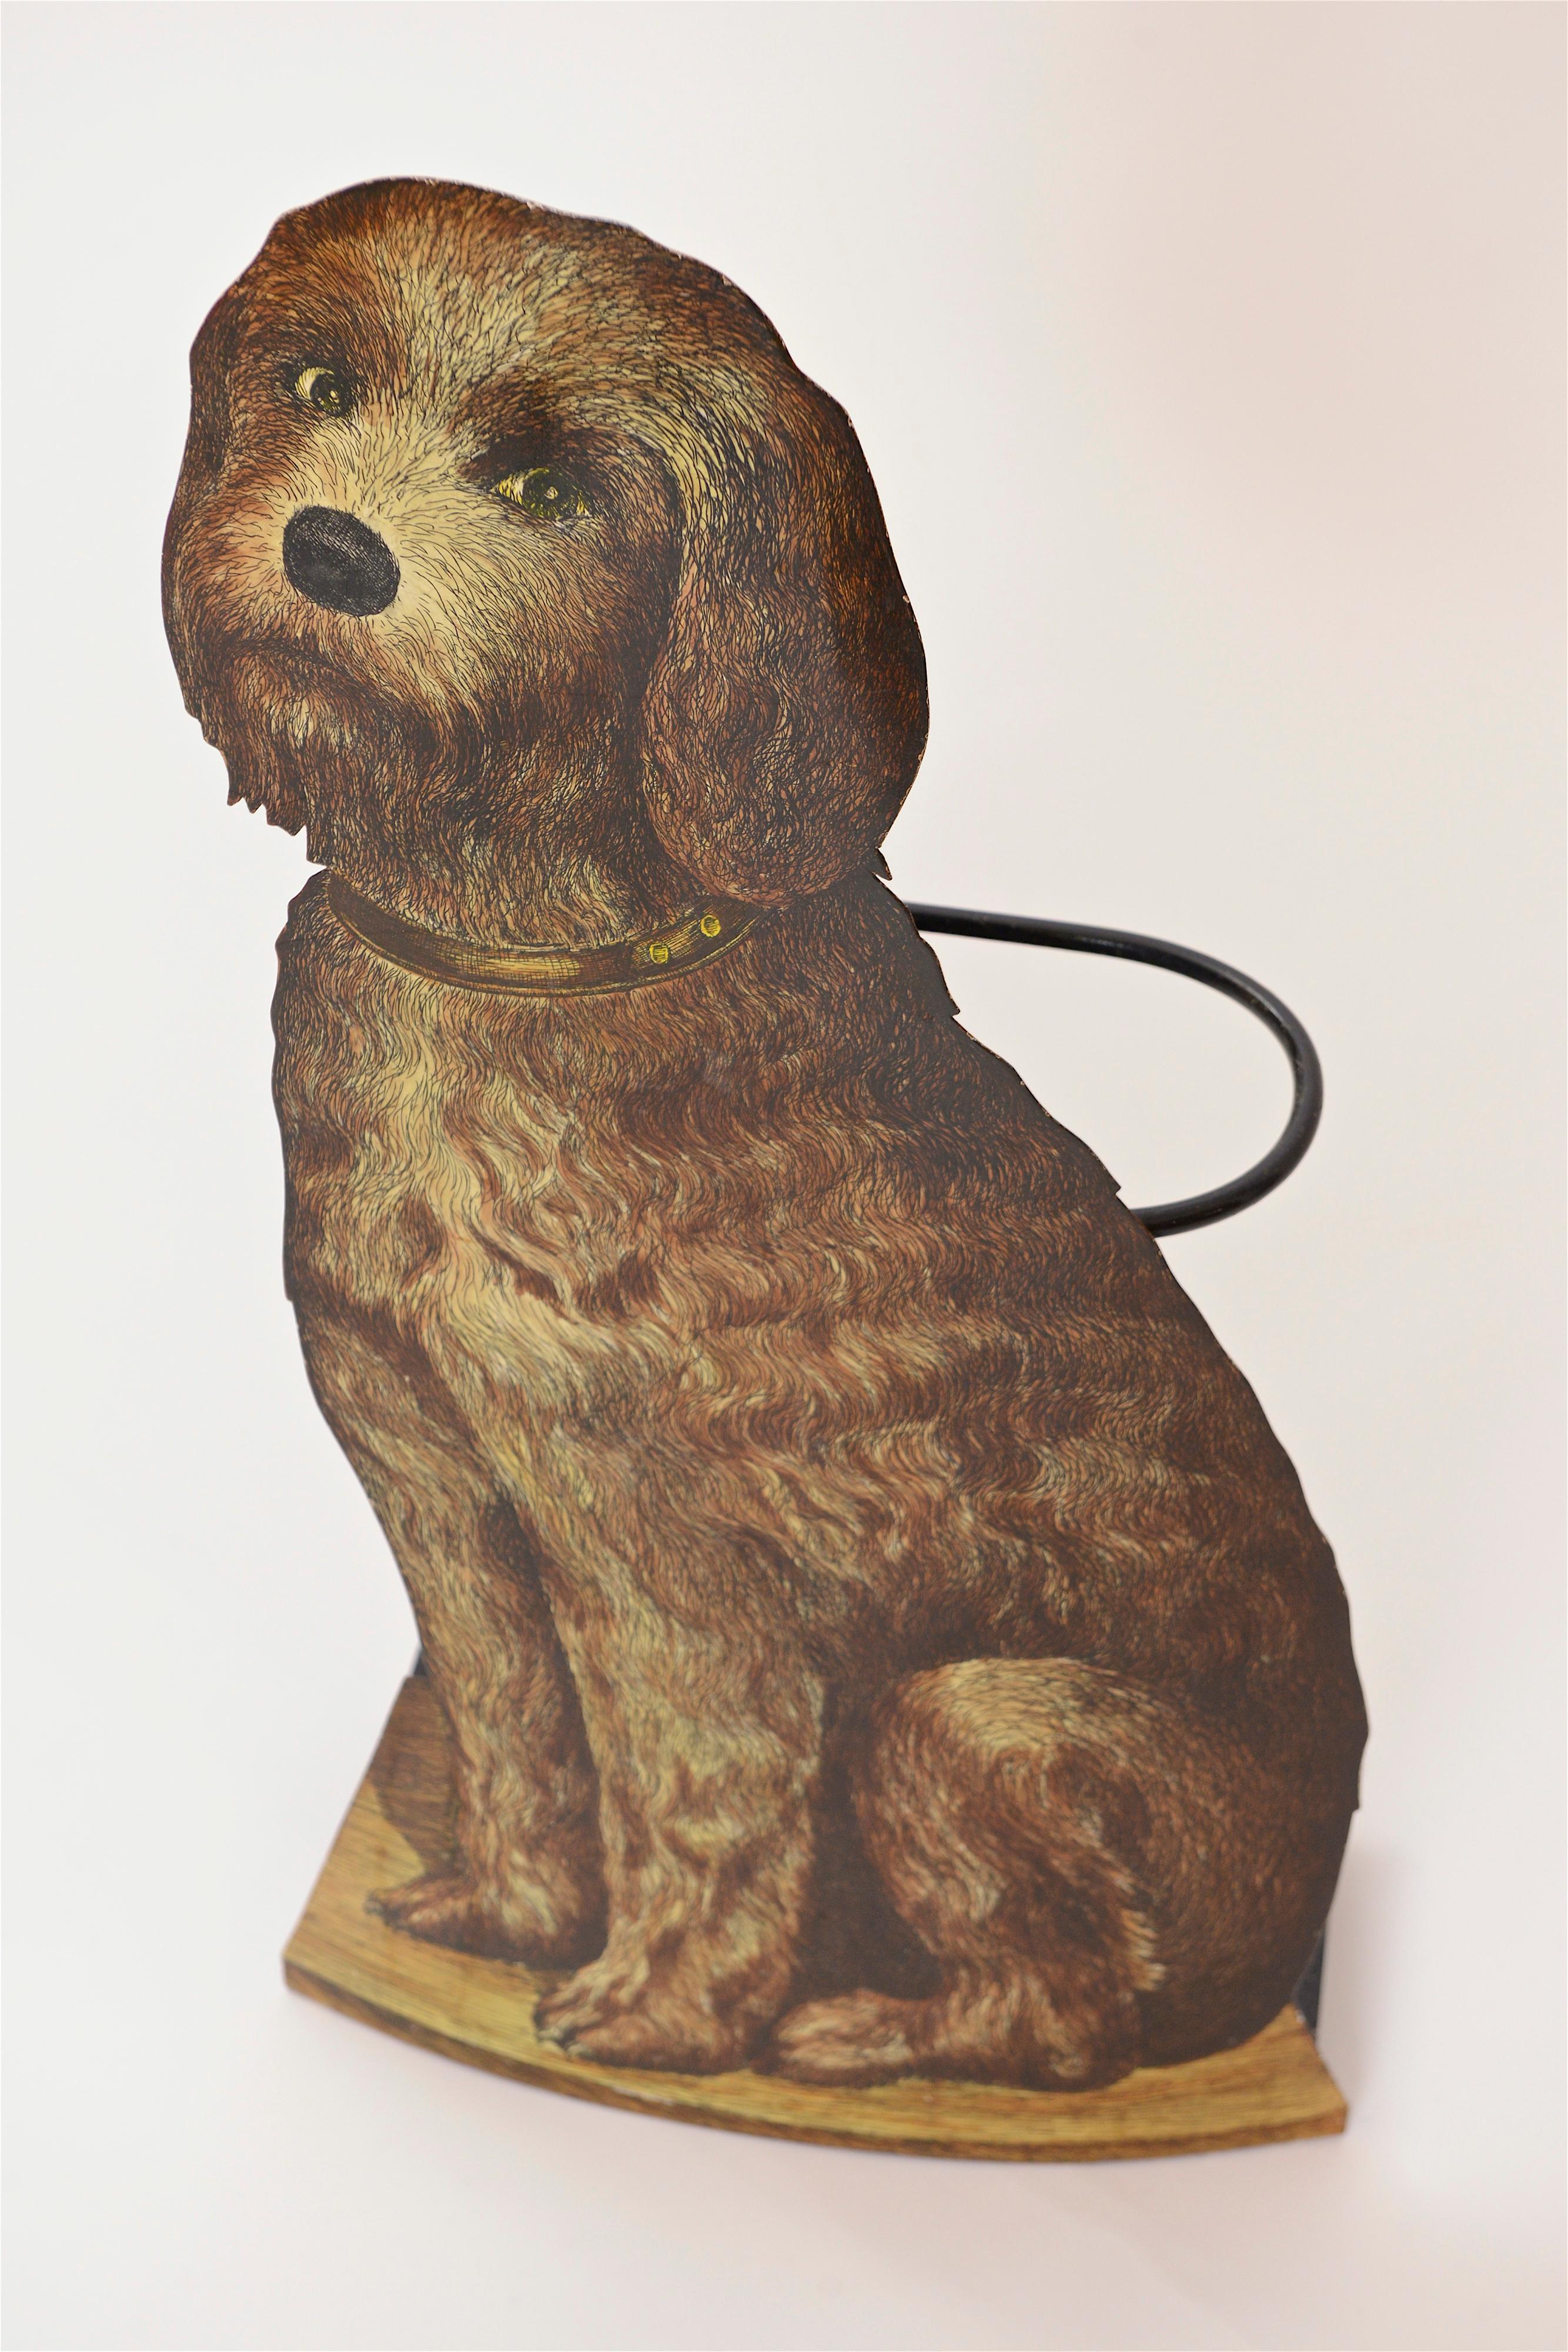 One of many dogs that Piero featured in his work, the Spinone, an Italian breed, takes centre stage on this fantastic umbrella stand. Signed on the reverse with the manufacturers label, it comes complete with the original drip-tray…a great piece for